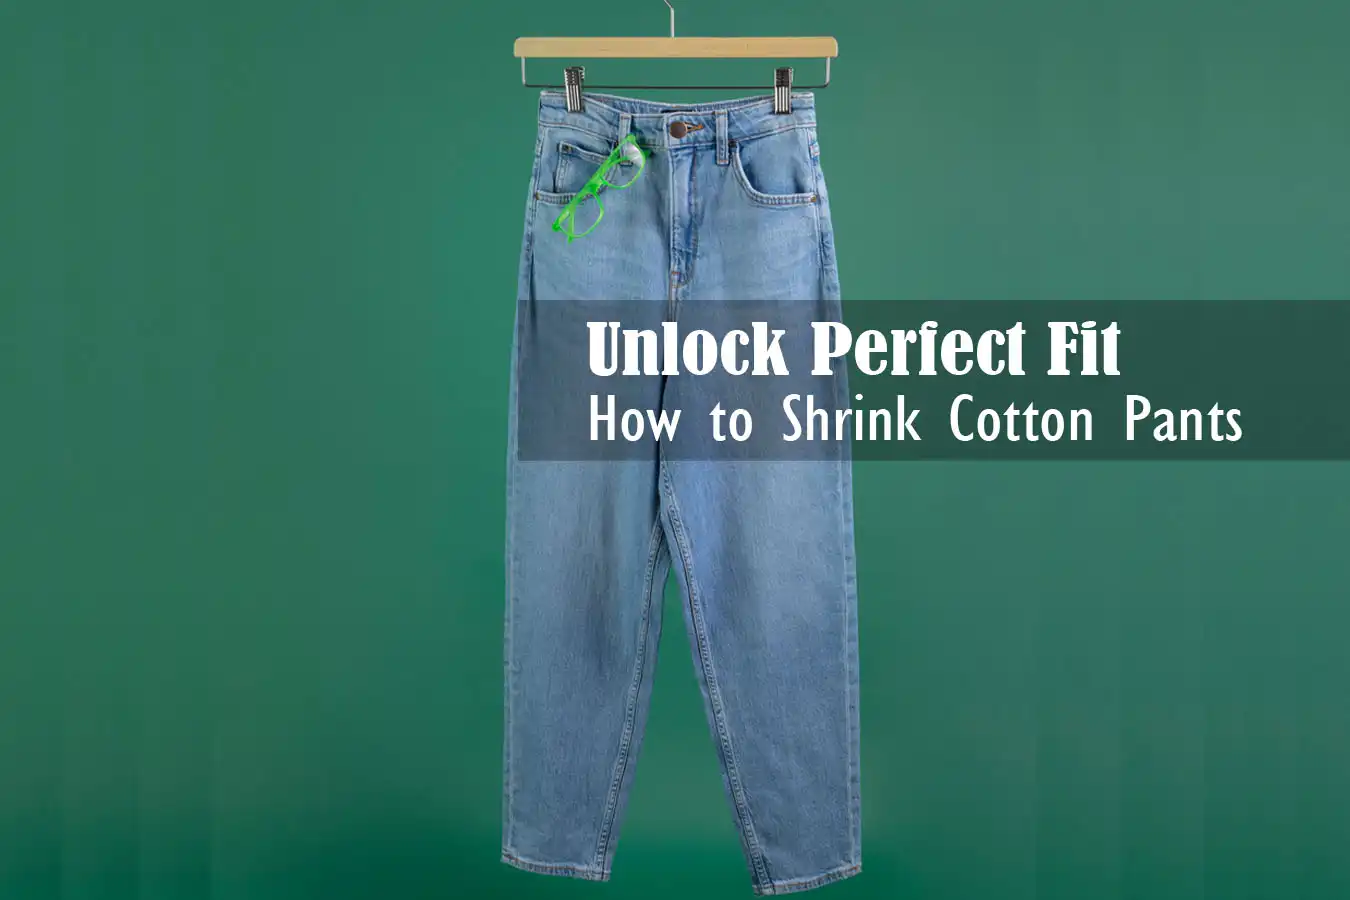 How to Shrink Cotton Pants